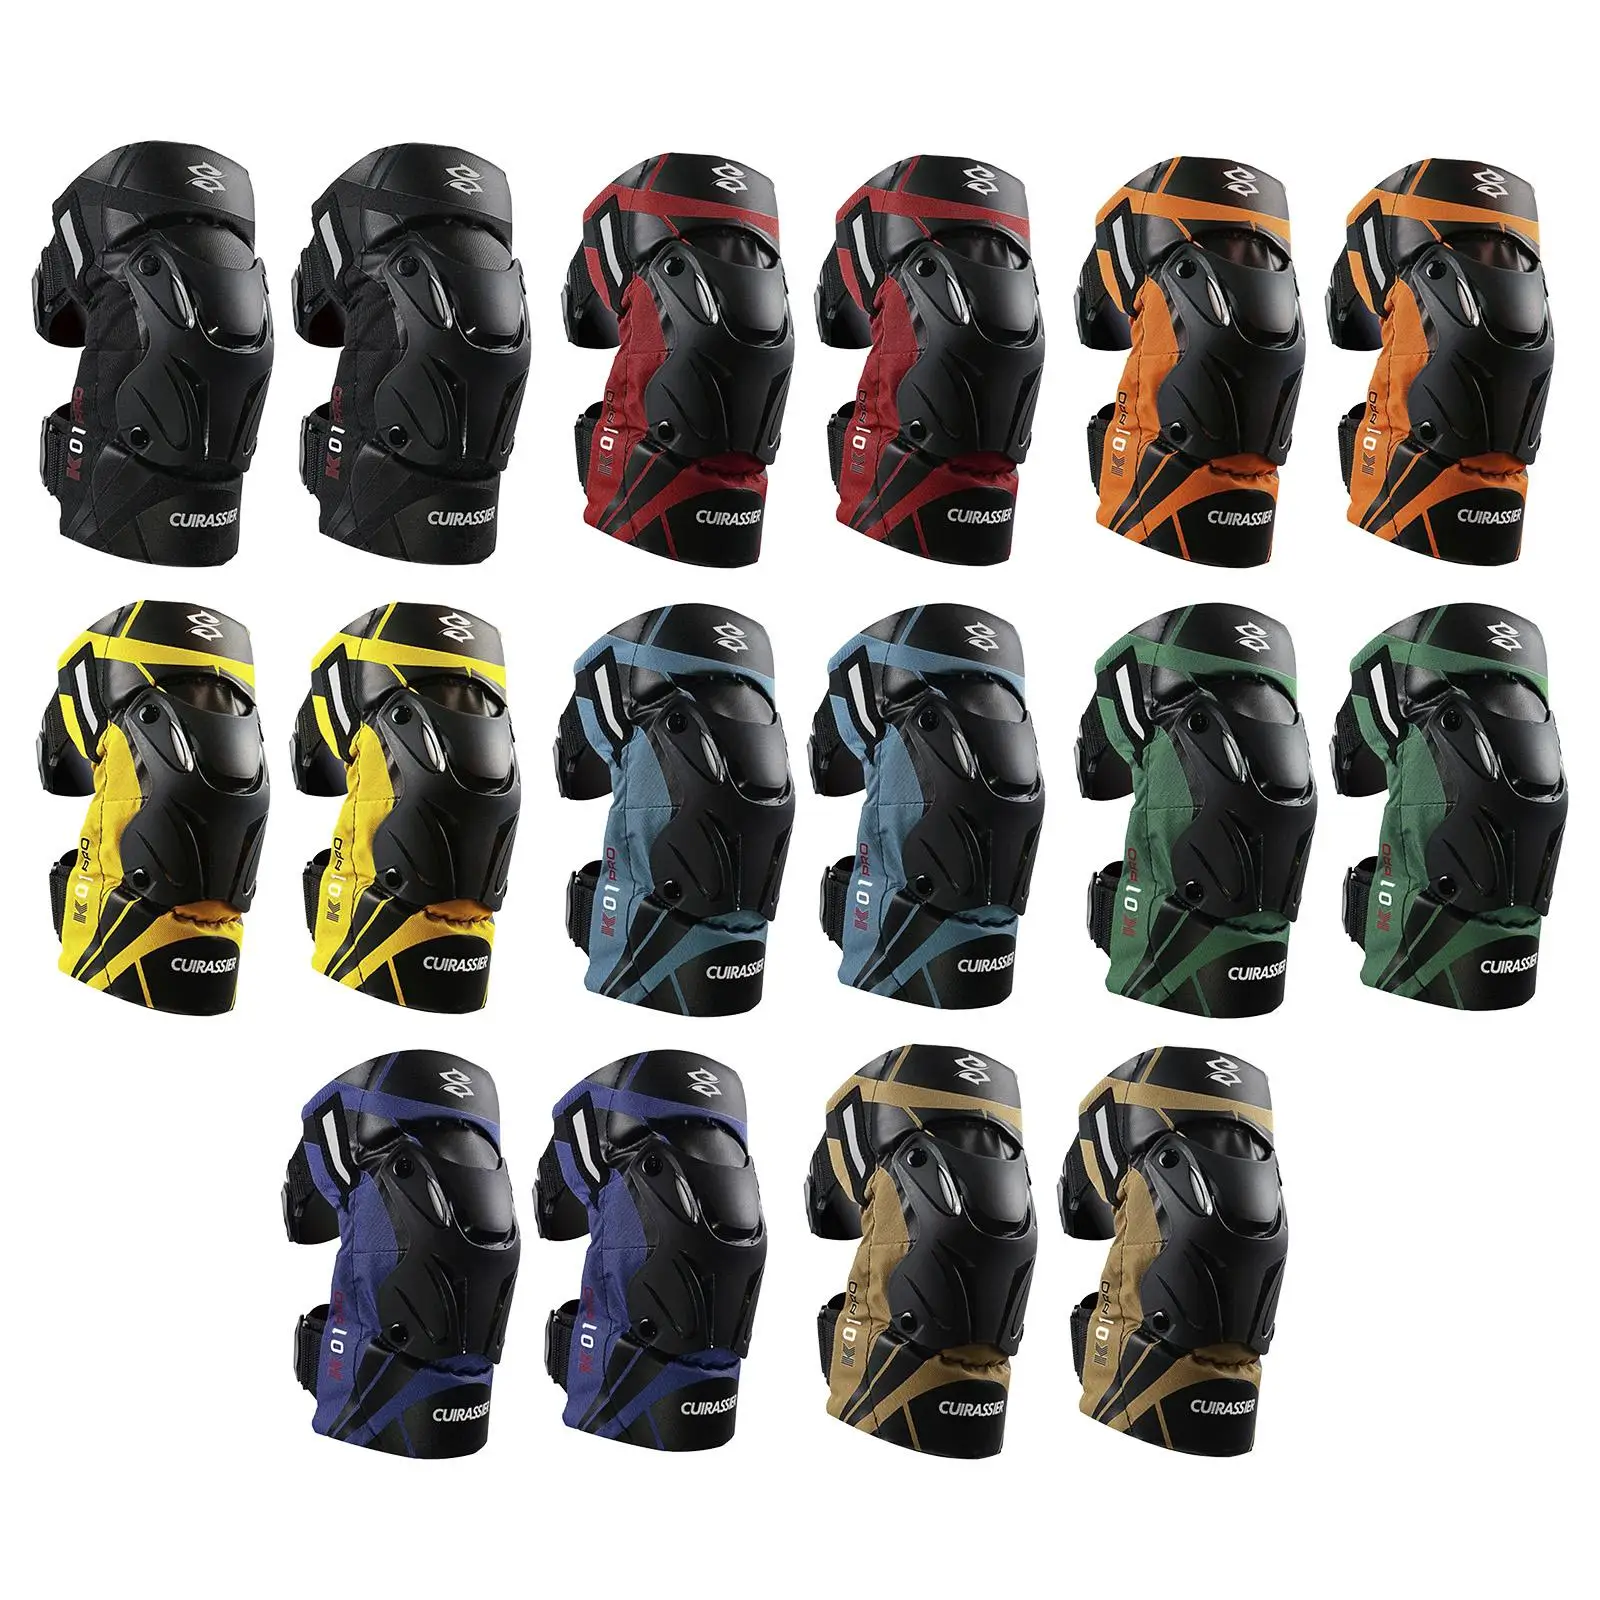 

2x Motorcycle Pads Guard for Motocross Racing Thermal Insulation